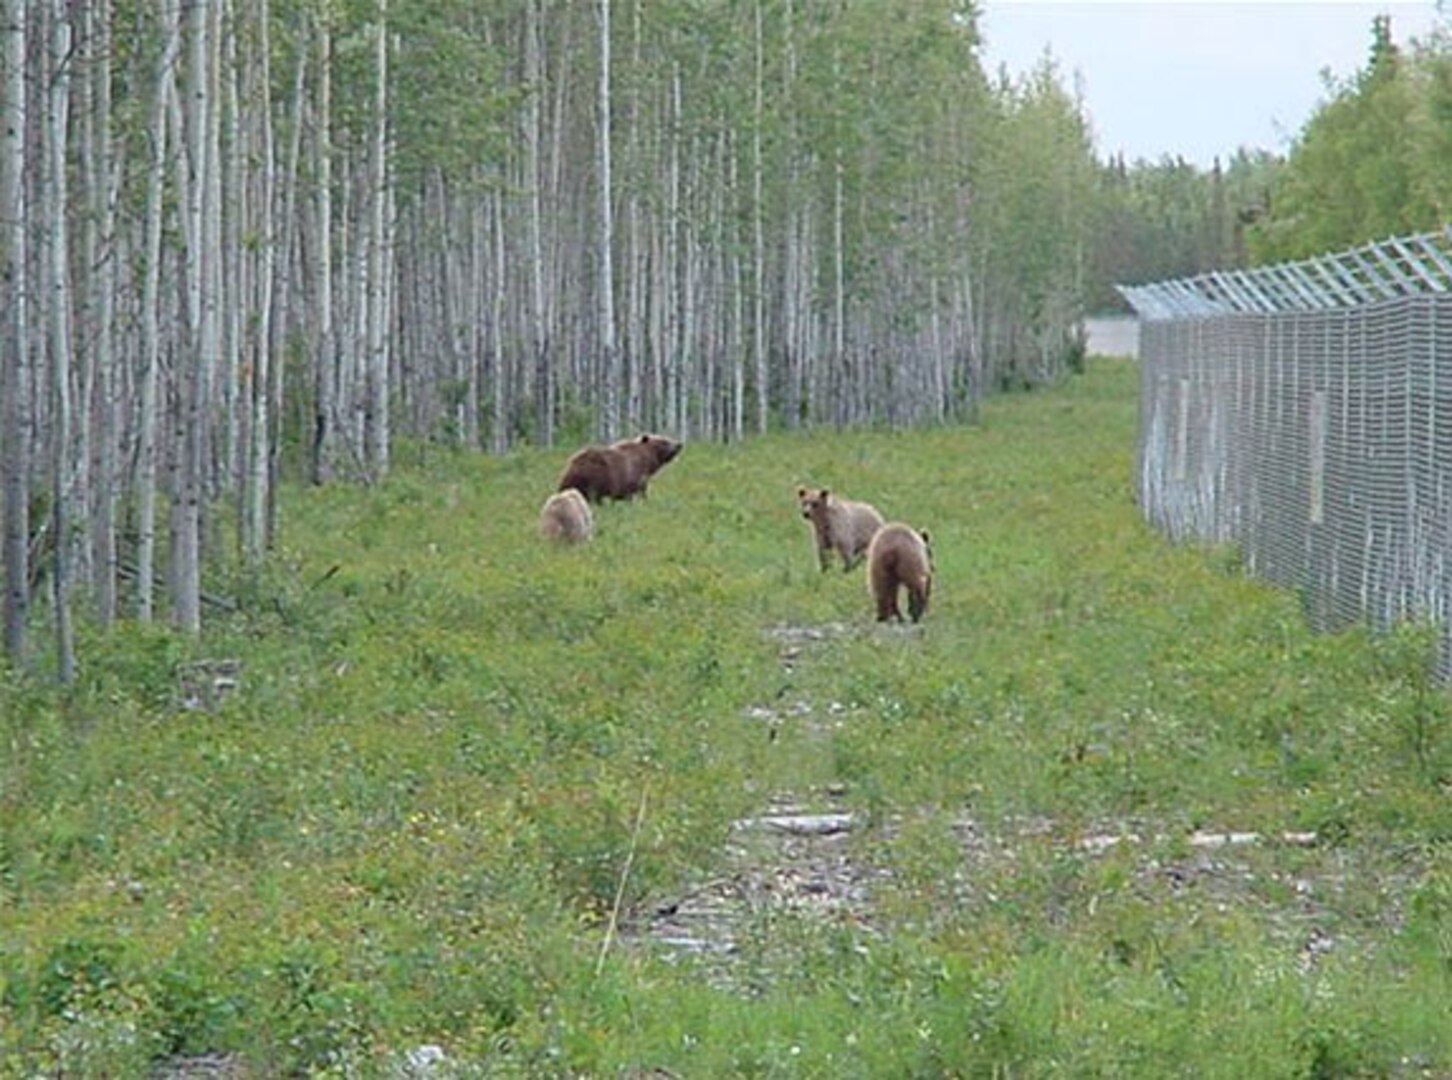 Grizzly bears outside Fort Greely fence. Although not common, the last Grizzly bear sighting was June 12, 2007.